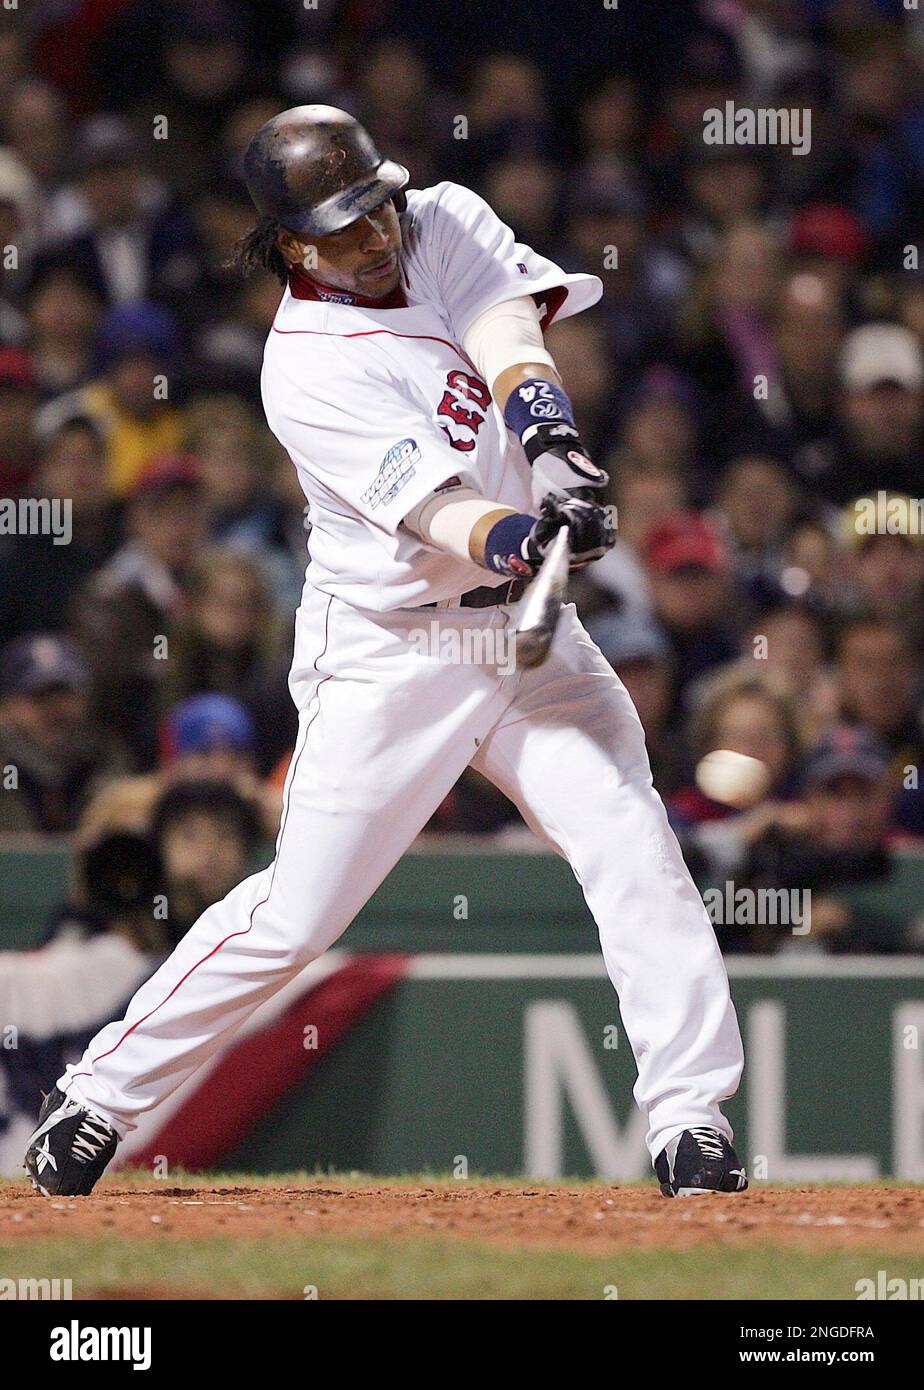 Boston Red Sox's Manny Ramirez hits into a fielder's choice in the third inning against the St. Louis Cardinals in Game 1 of the World Series Saturday, Oct. 23, 2004 in Boston. The Sox won 11-9. Brilliant with the bat, bumbling in the field, the Red Sox outfielder was in his usual form for Game 1 of the World Series (news - web sites) on Saturday night when he singled three times and committed two errors (AP Photo/Charles Krupa) Stock Photo